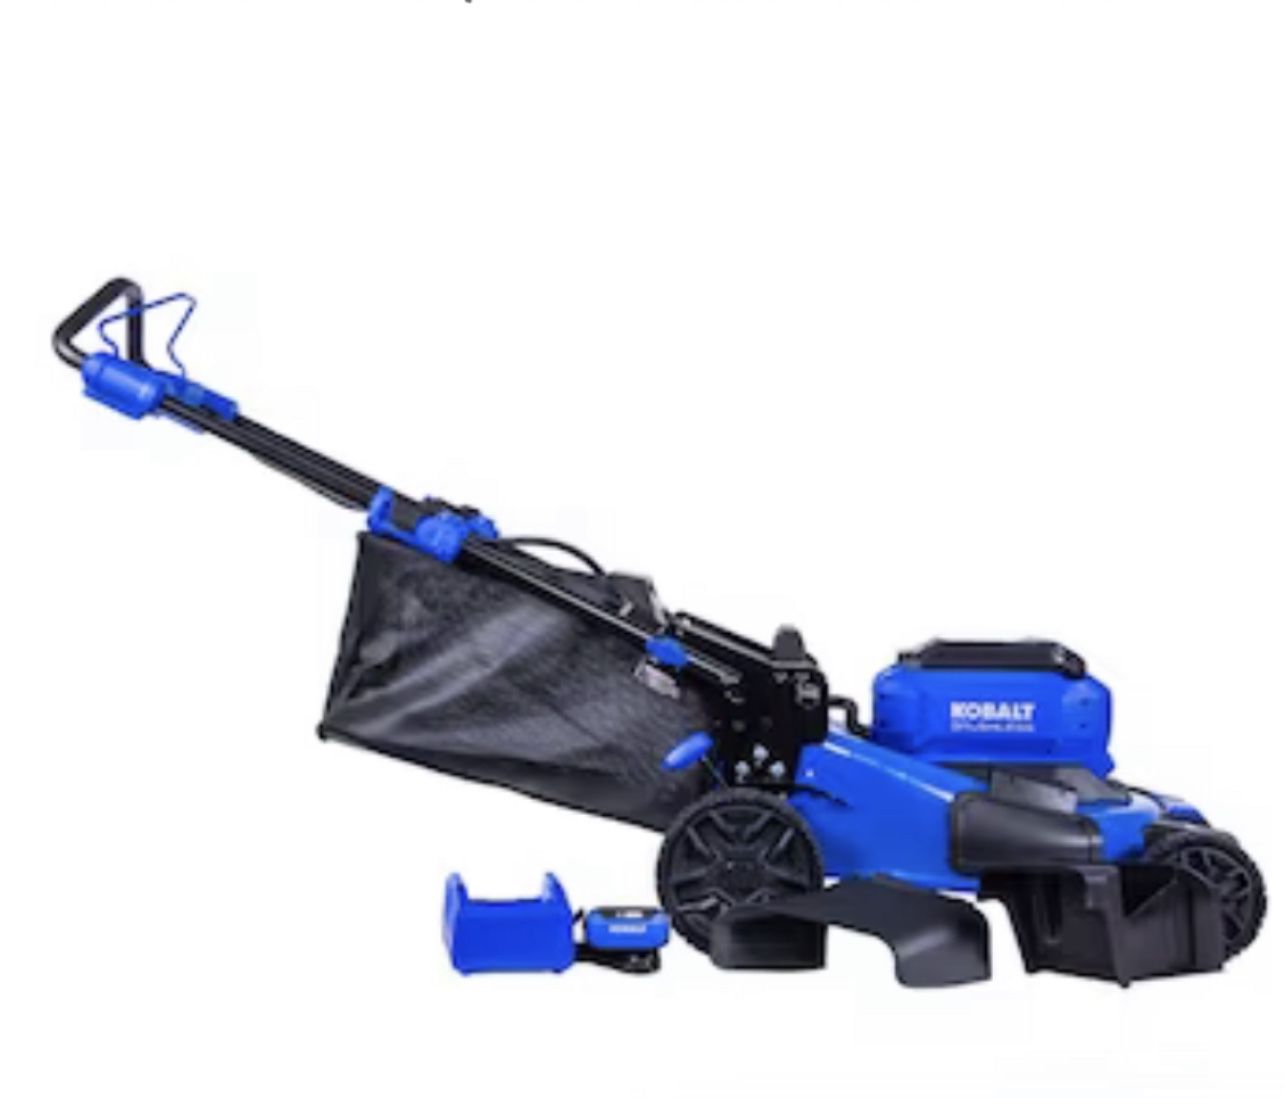 Kobalt 20” 3 In 1 Push Mower 40 Volt 6ah Side Discharge Mulching Or Bagger With Charger BRAND NEW IN BOX 